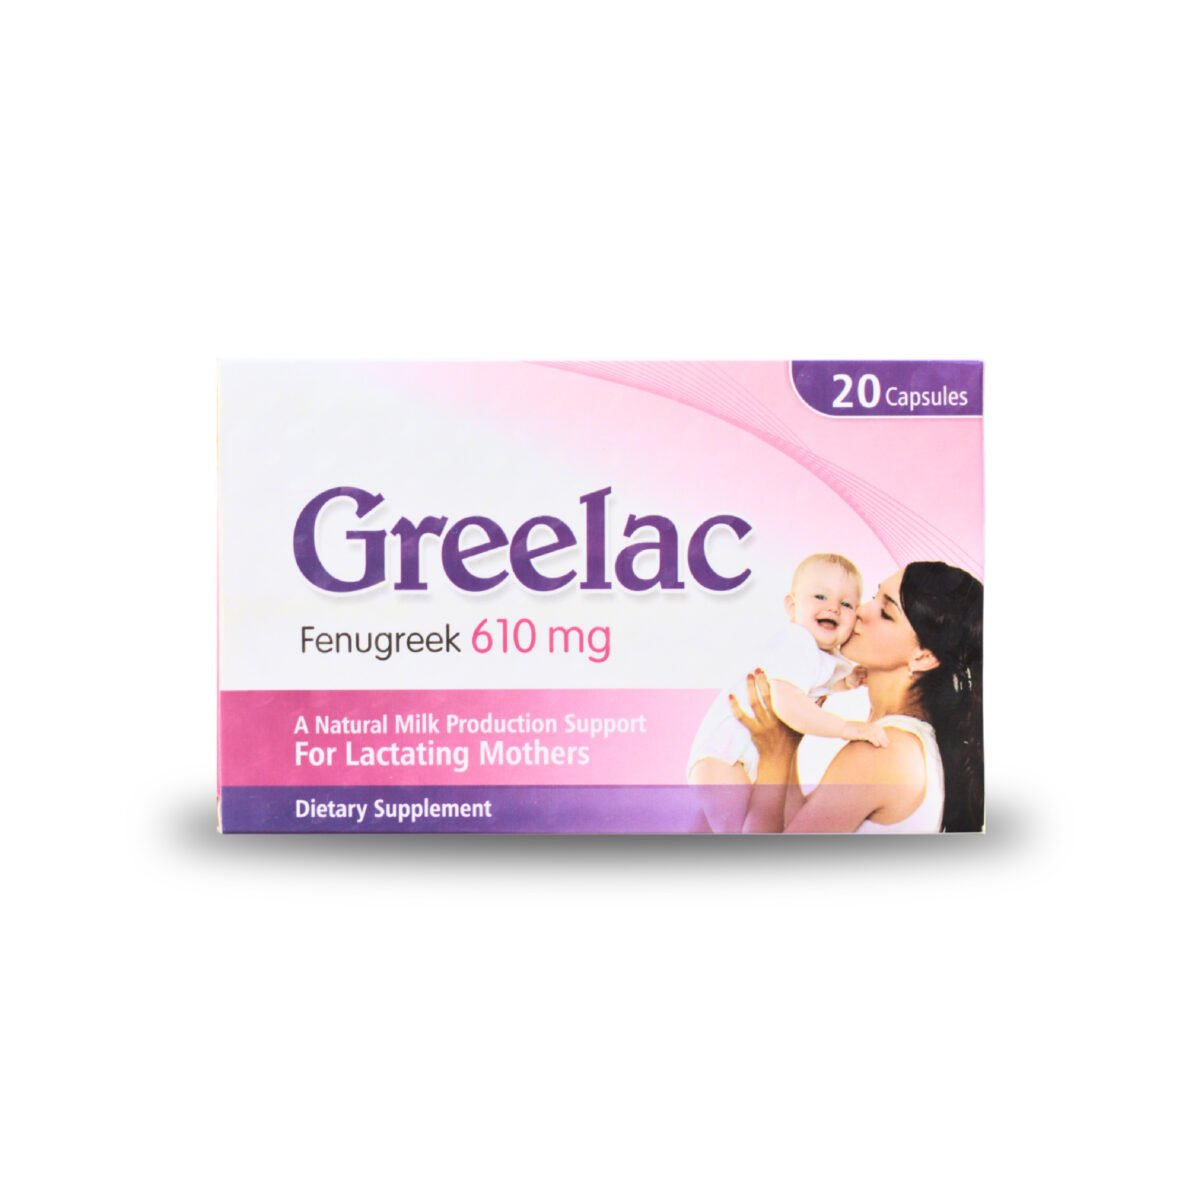 greelac-capsules-dietary-supplement-for-lactating-mothers-to-support-natural-milk-production